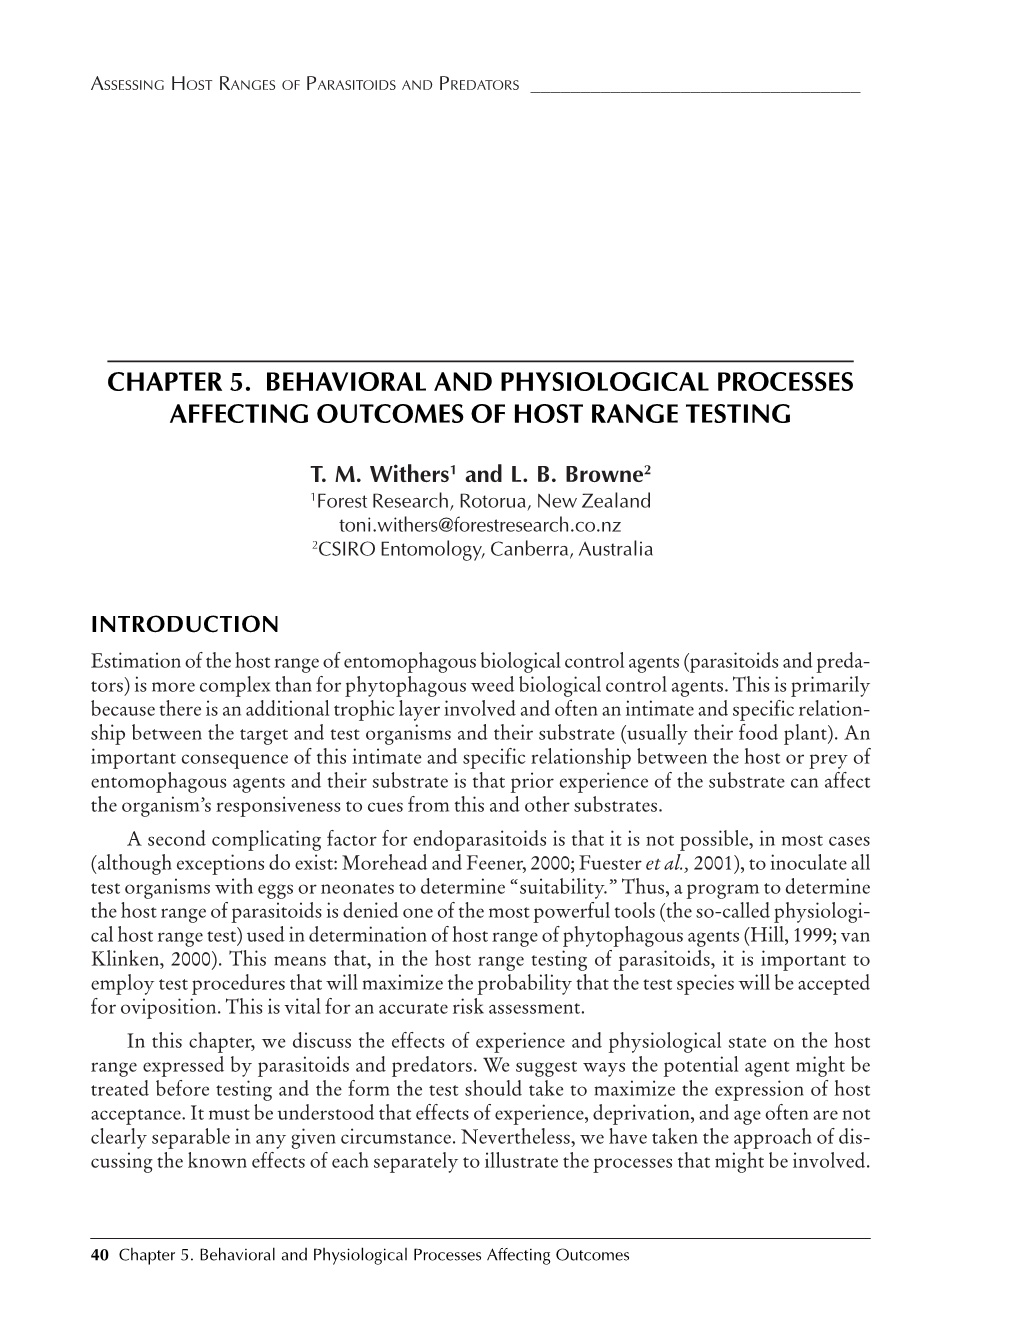 Chapter 5. Behavioral and Physiological Processes Affecting Outcomes of Host Range Testing